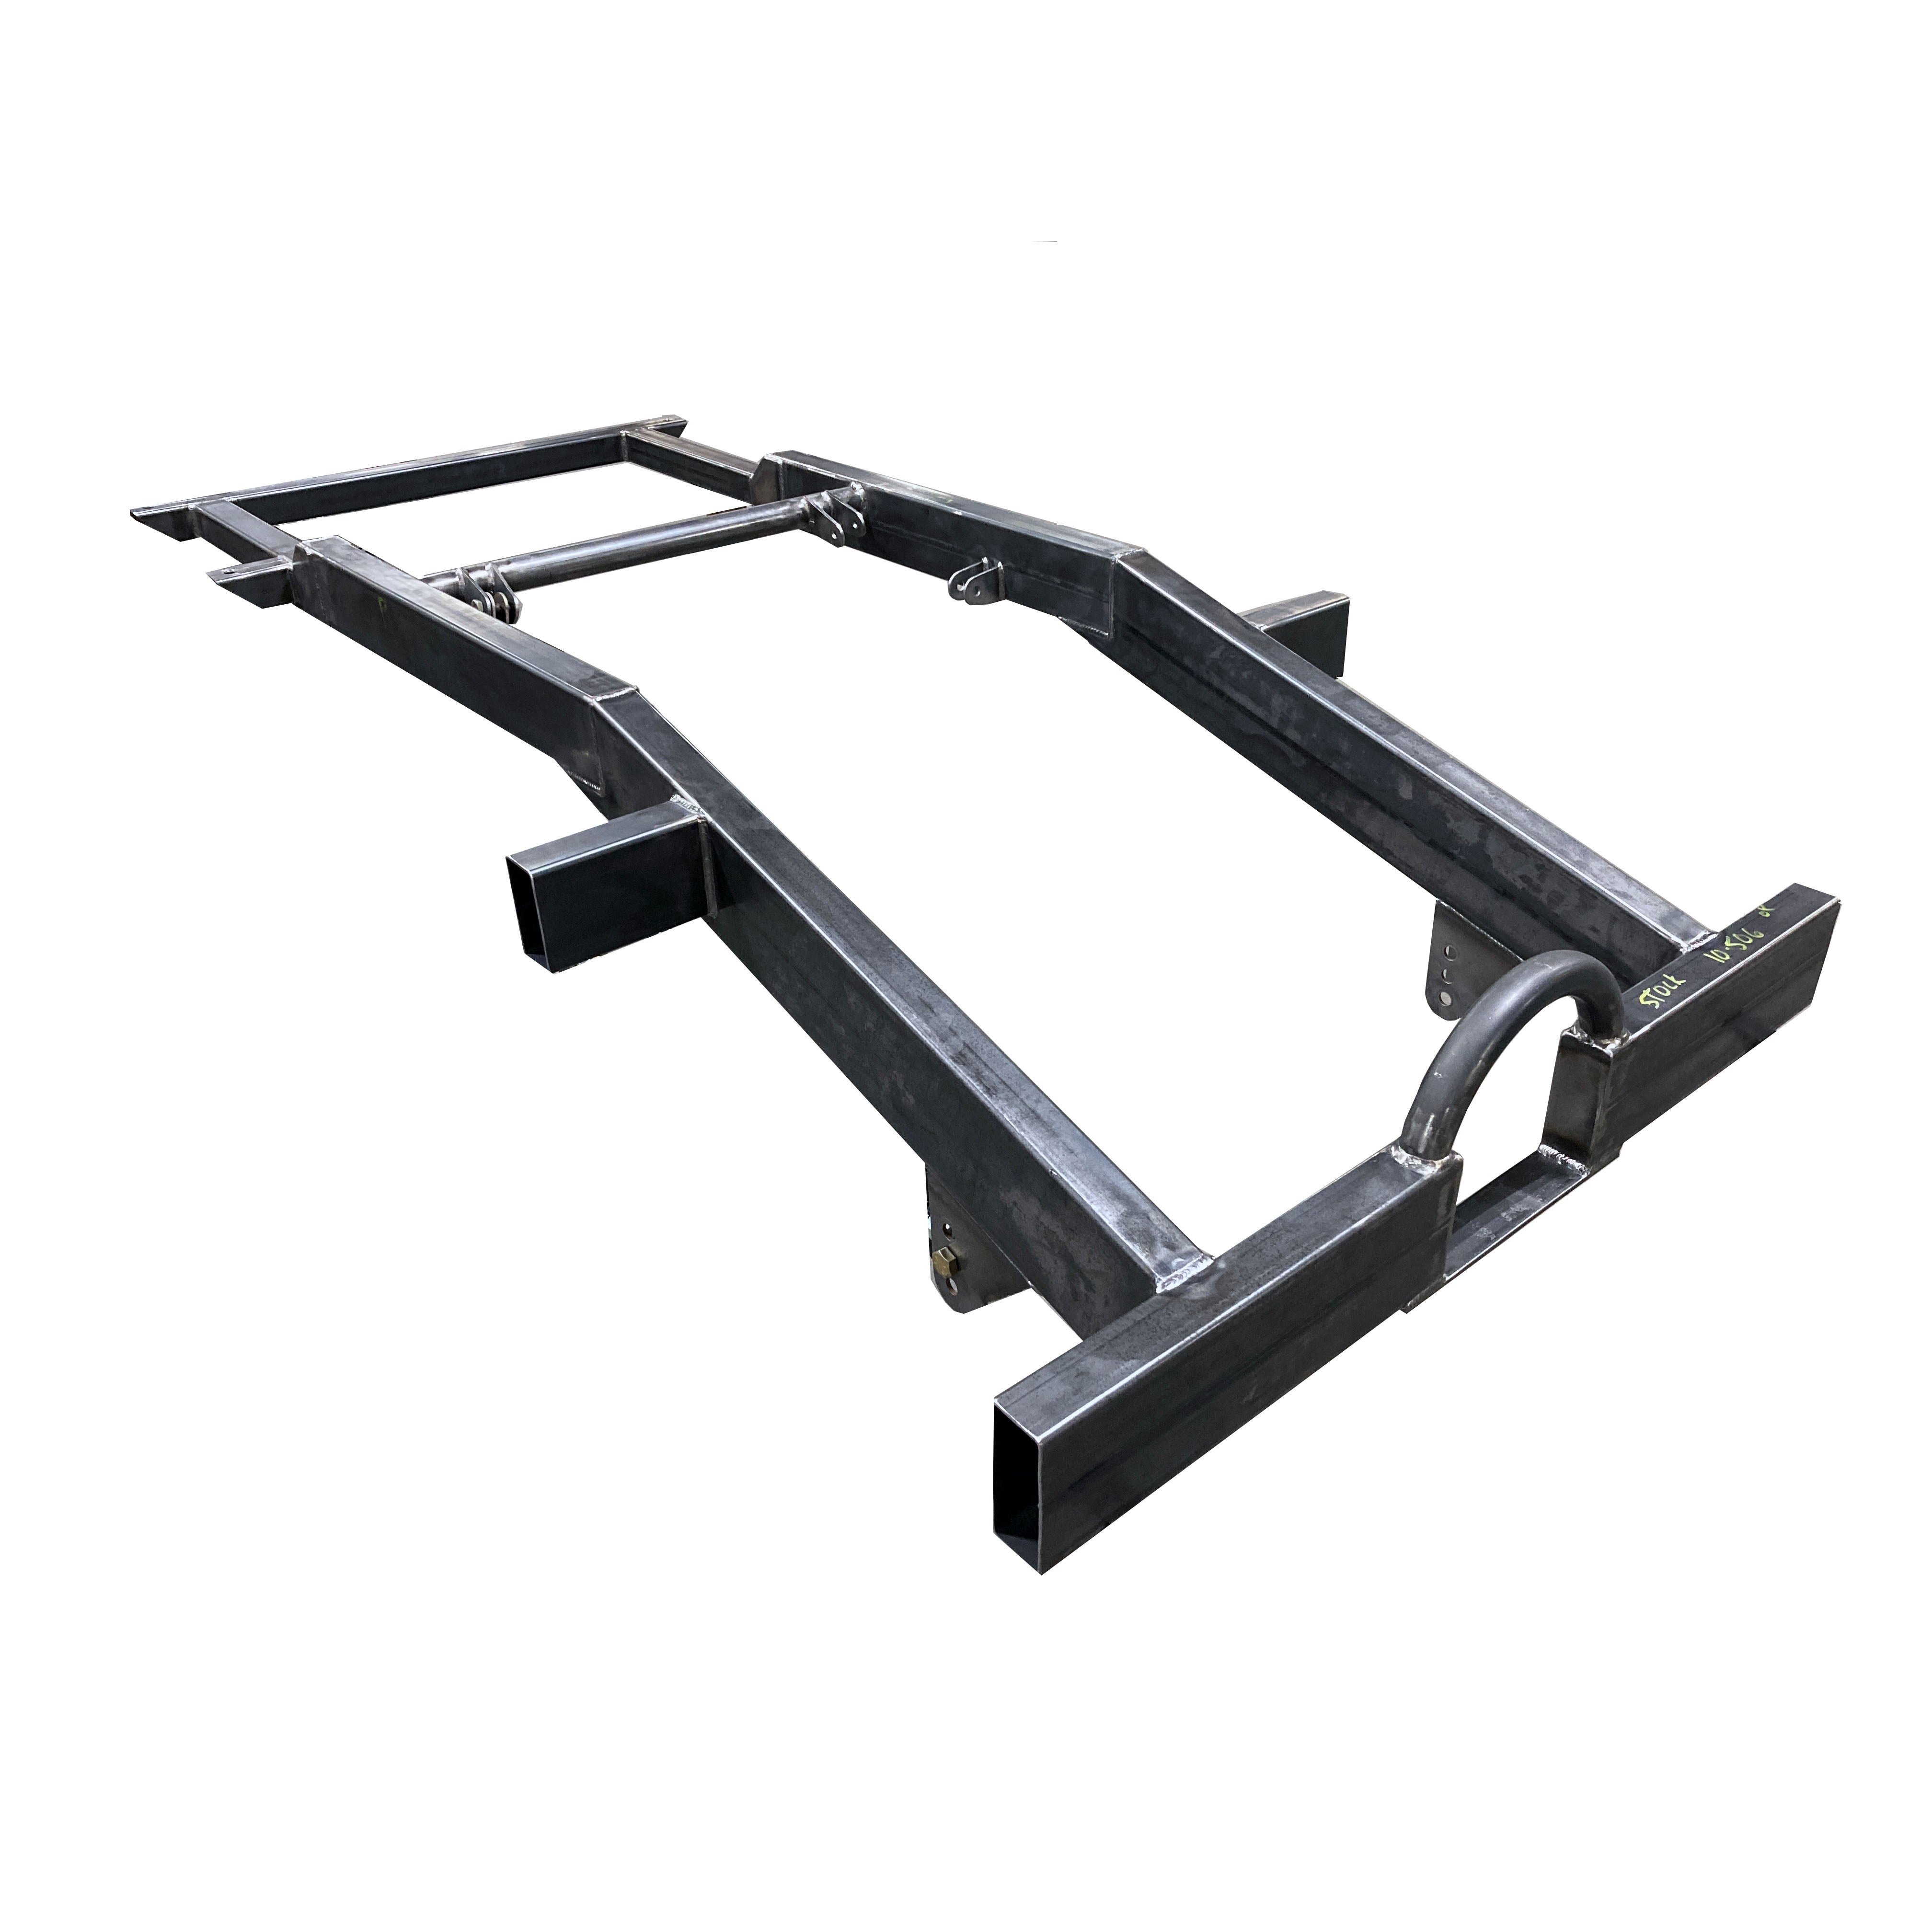 1988-1997 Chevrolet Chevy C1500 Direct Fit Fully Welded Ladder Bar Rear Frame